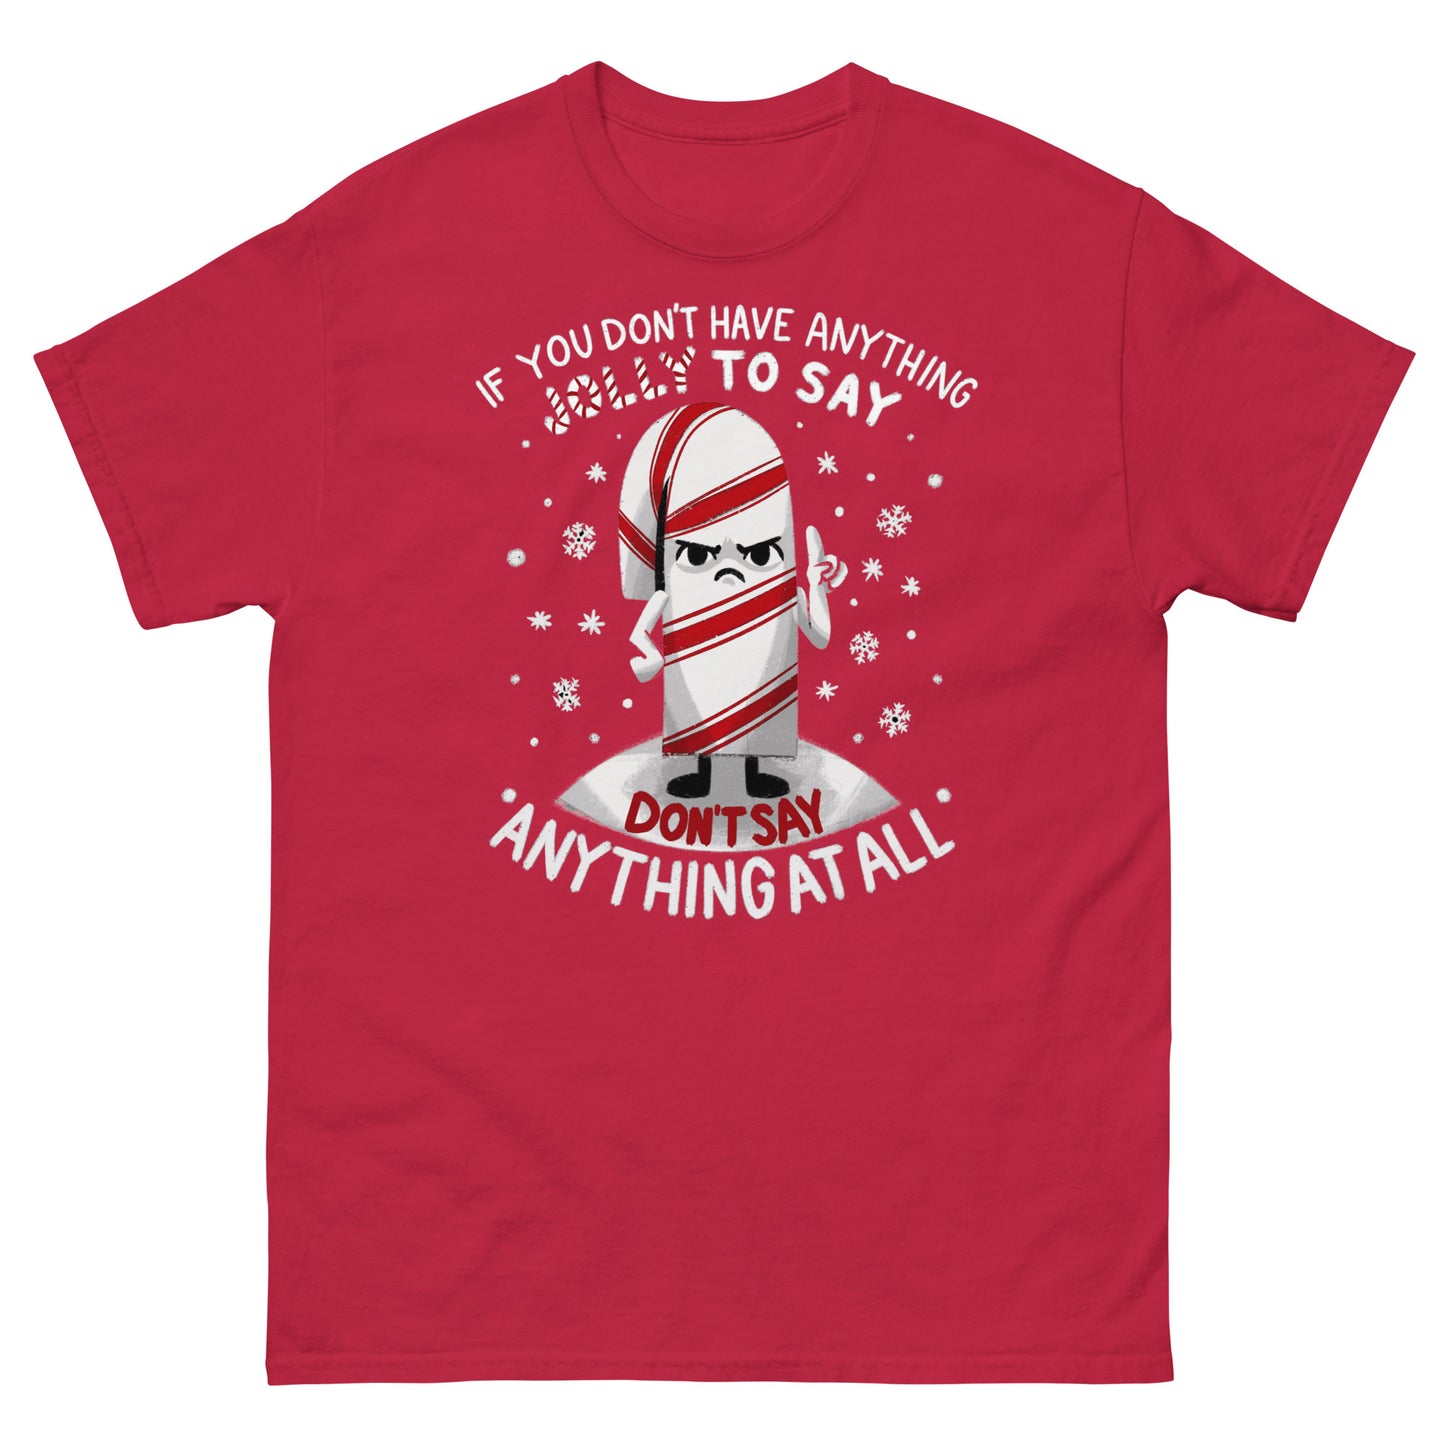 If You Don't Have Anything Nice To Say - Funny Christmas T-Shirt